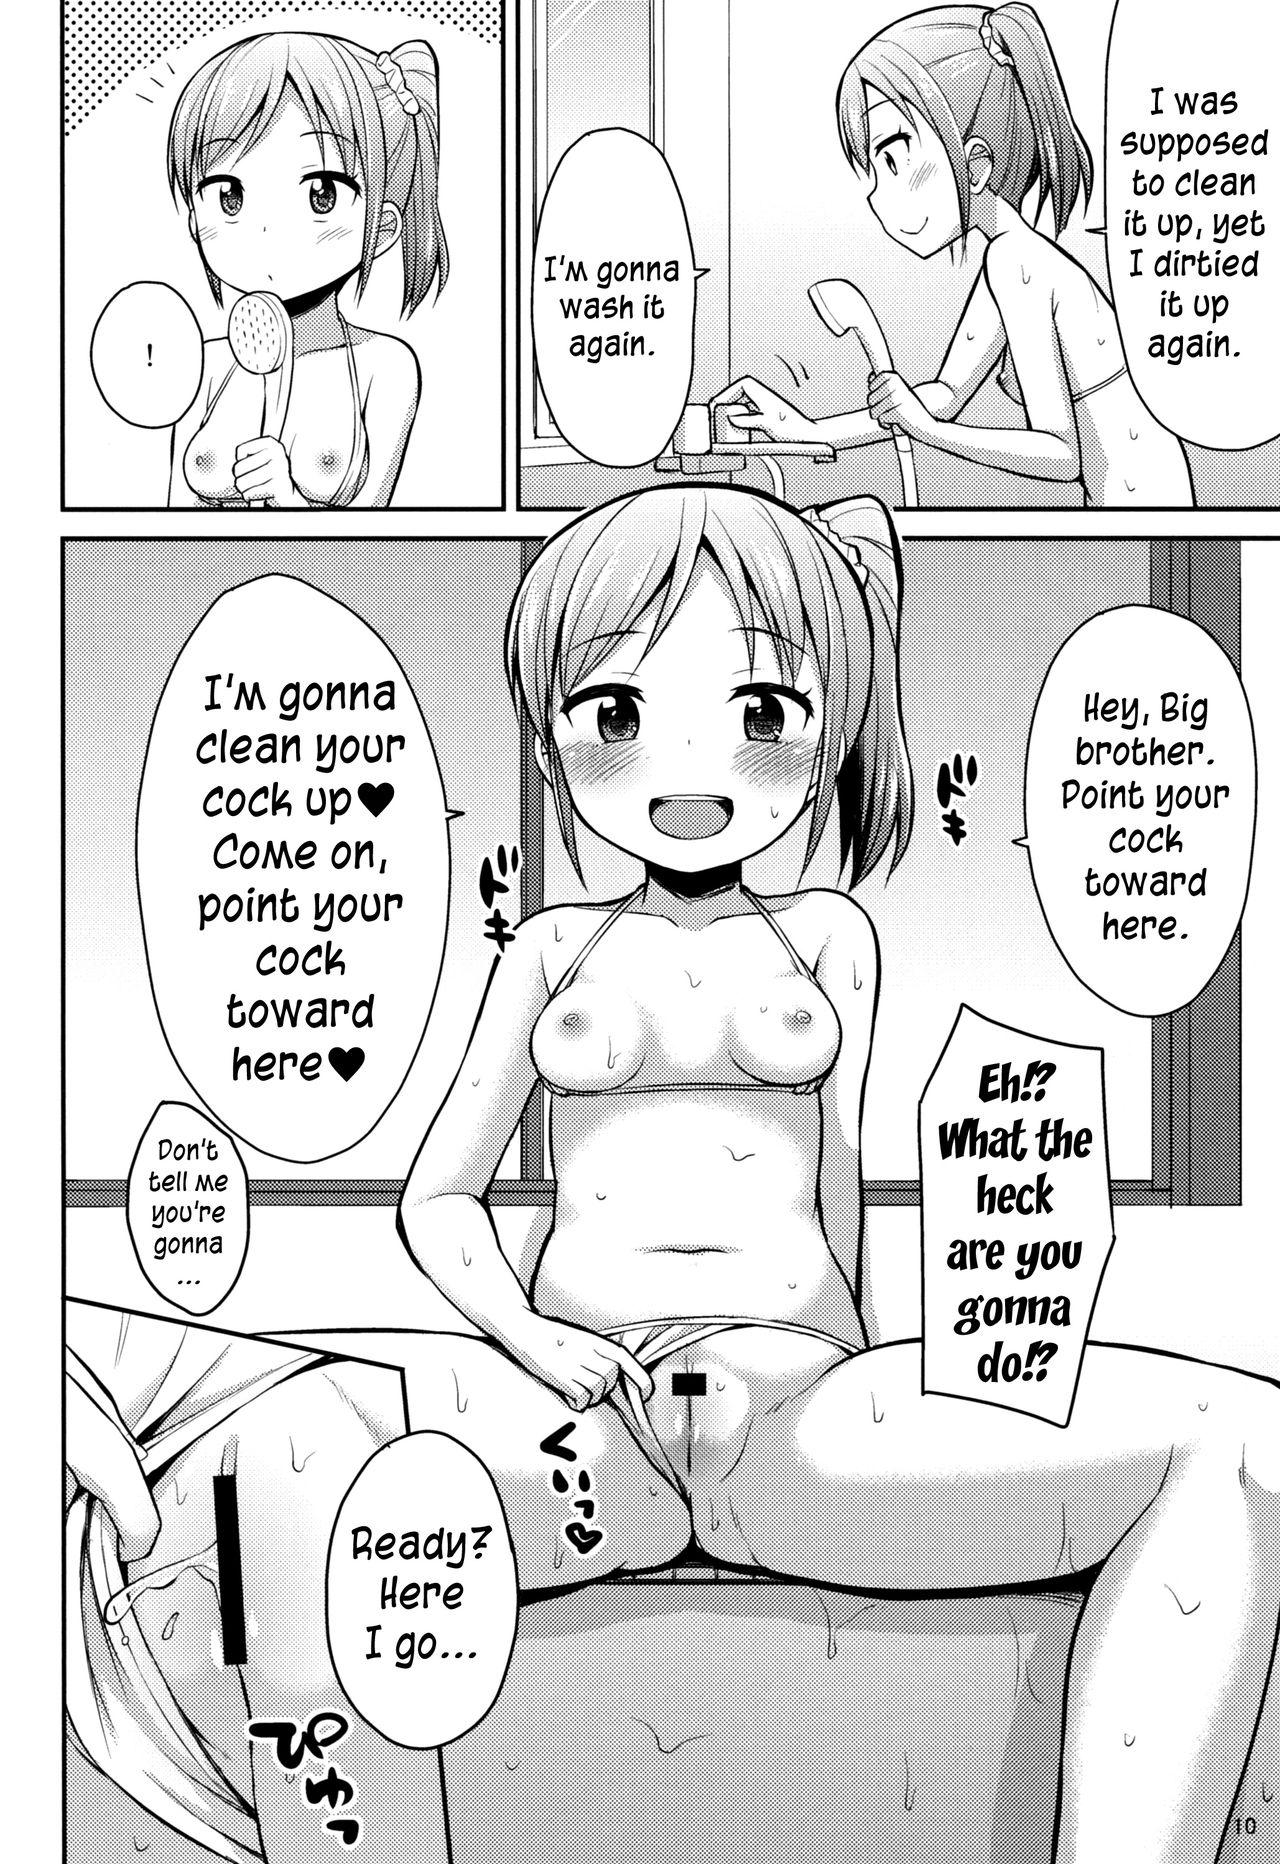 Dominate Oniichan "Socchi" mo Aratte Ageyokka♥ | I'm going to wash you down there, too, Big brother♥ Tinytits - Page 9